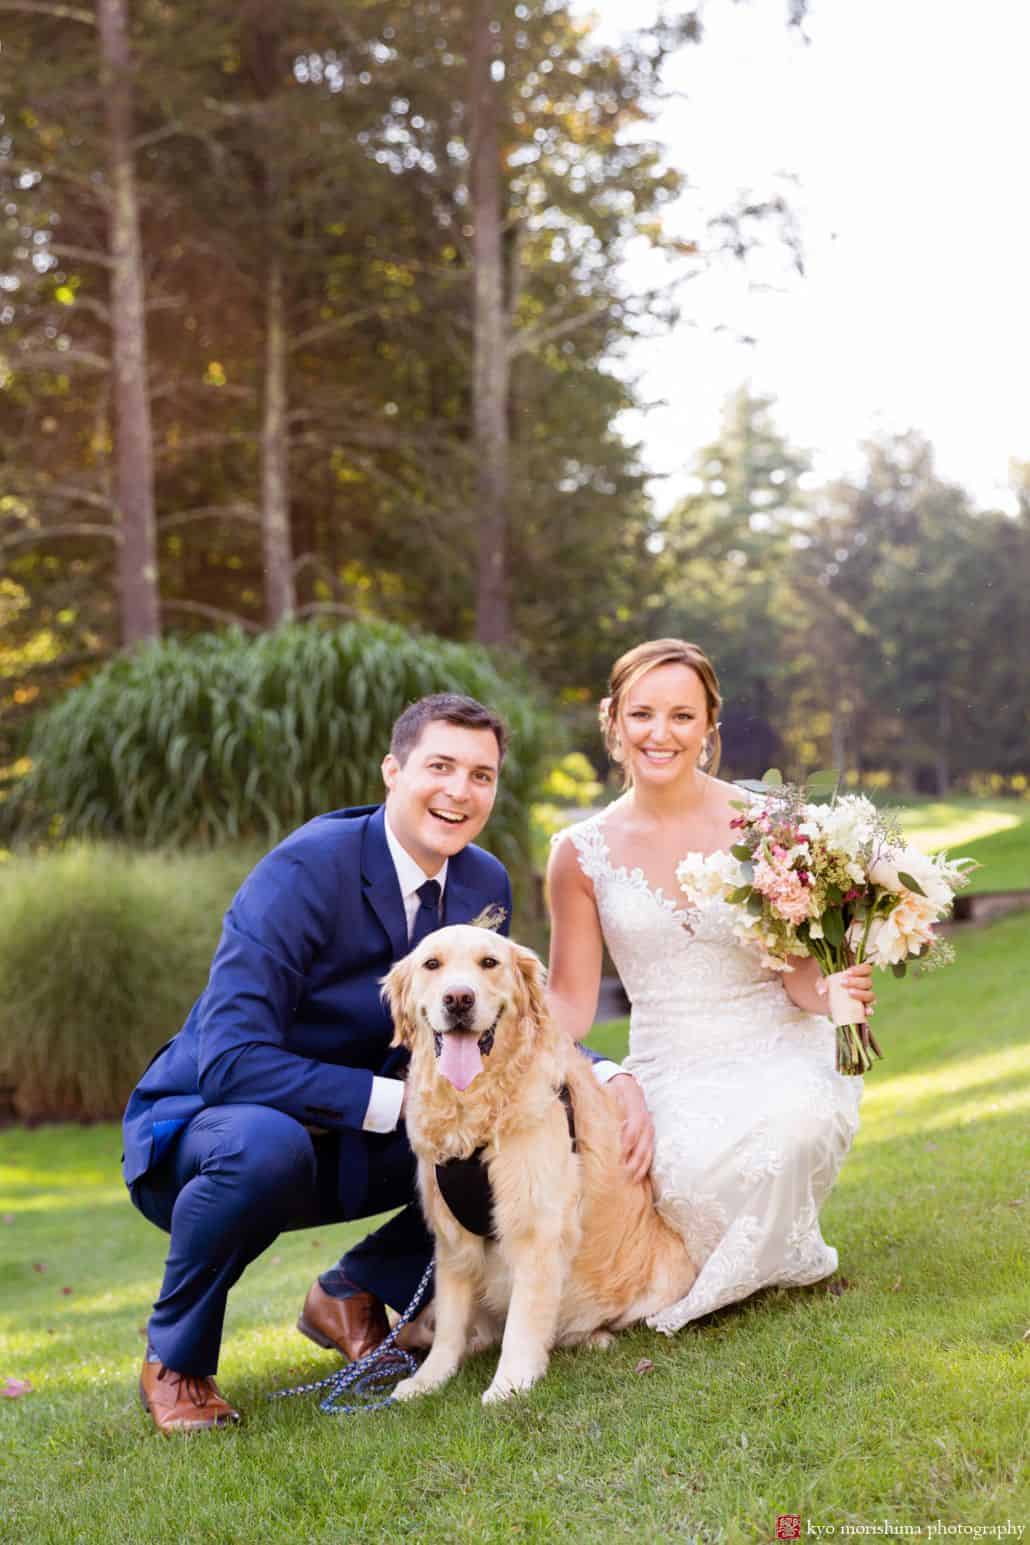 Light-hearted portrait session of a happy groom and bride with their pet dog, a Labrador, the bride holding her bouquet of flowers and the groom bent down to be closer to their dog, behind them are trees and plants, photograph by a wedding photographer in central NJ Kyo Morishima.